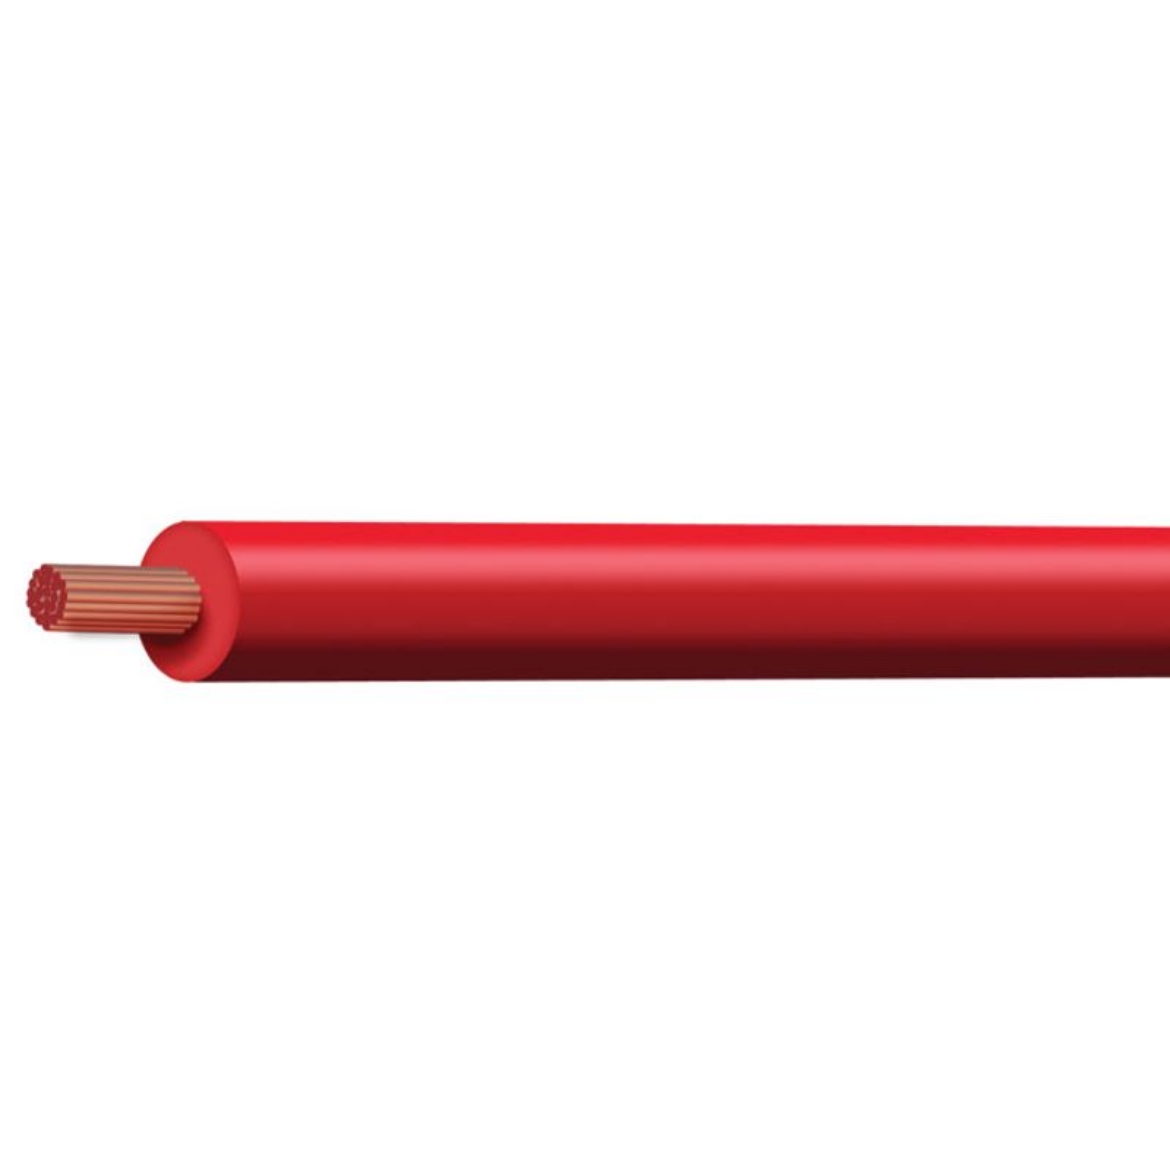 Picture of TYCAB SINGLE CORE CABLE BATTERY 8 B & S CROSS SECT 8MM SQ RATING 85A RED - 30M ROLL